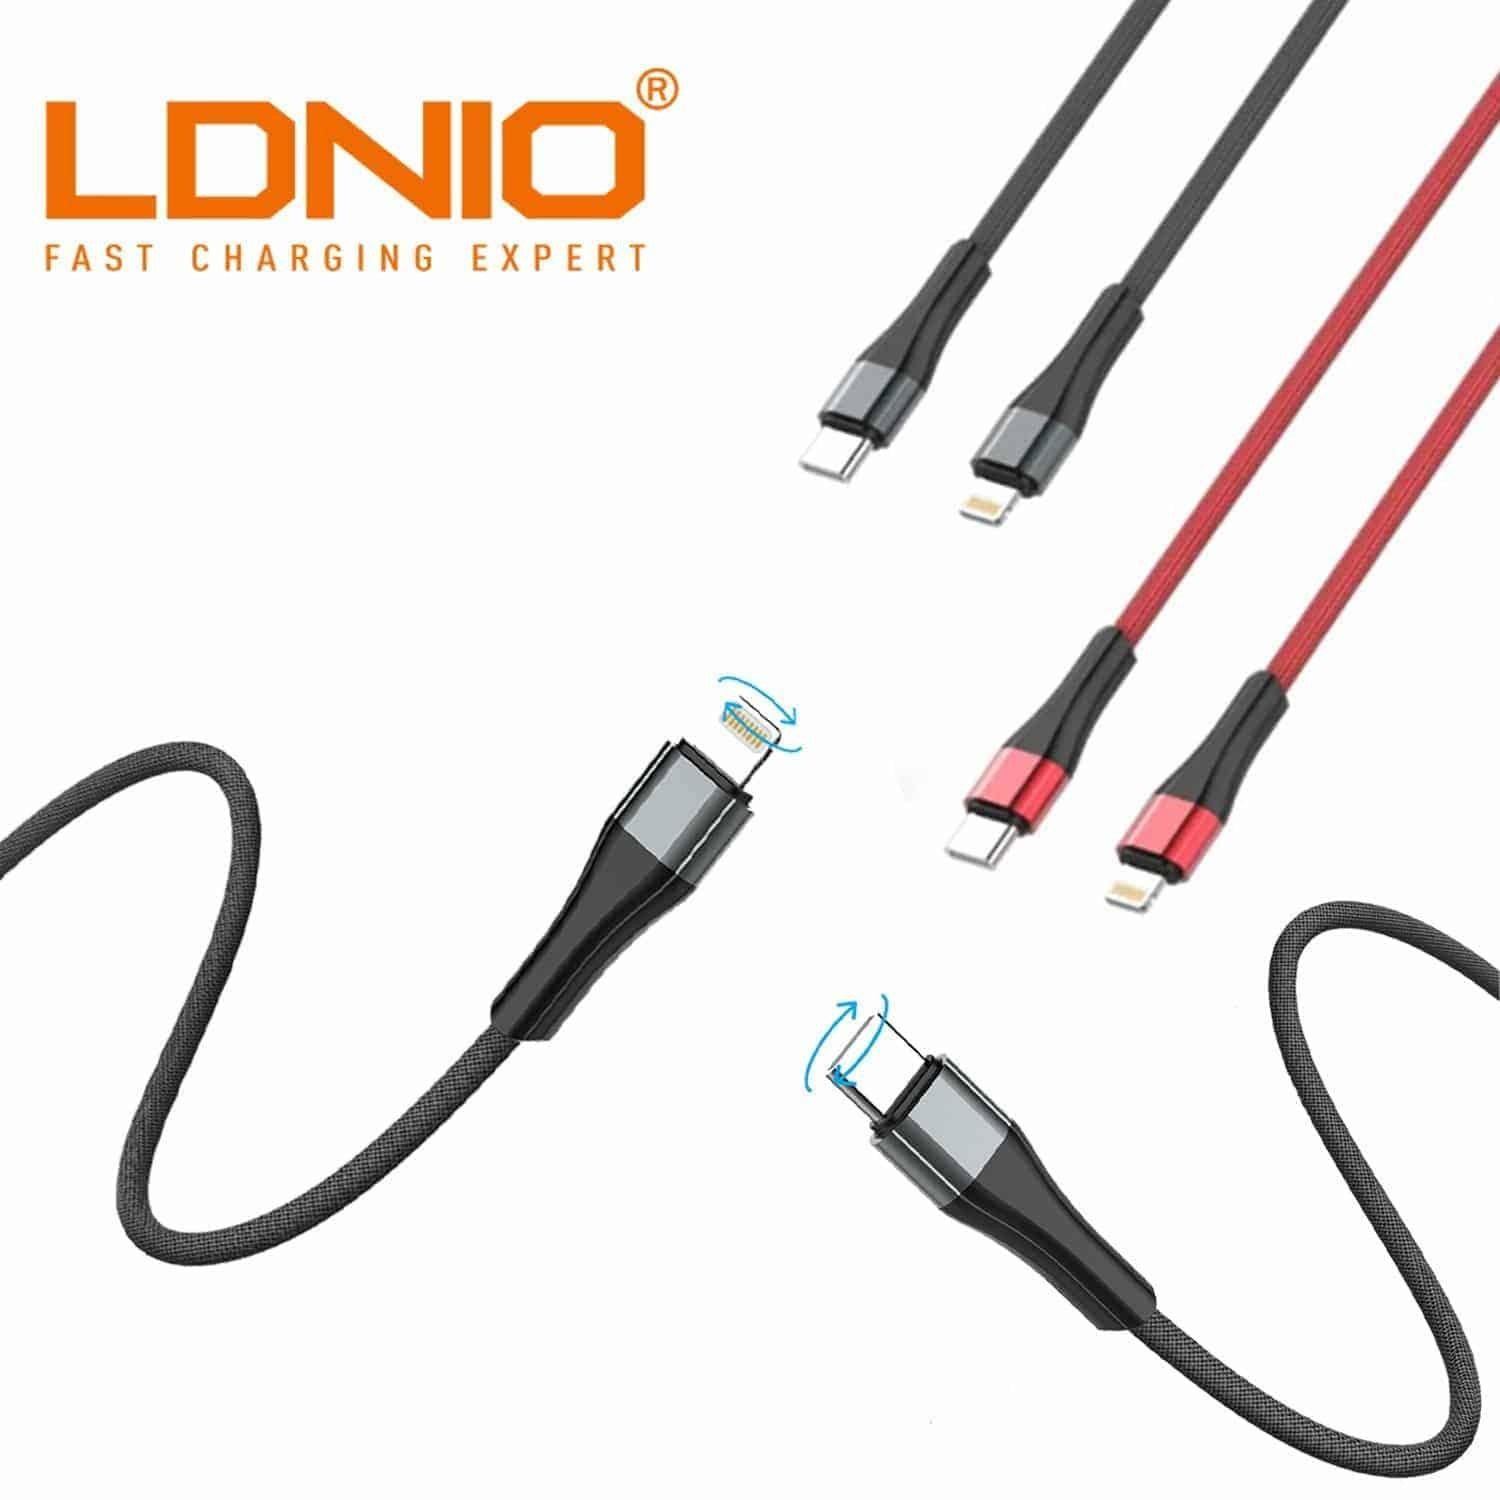 LDNIO Super Fast Charging USB-C Lightning Cable | Shopna Online Store .